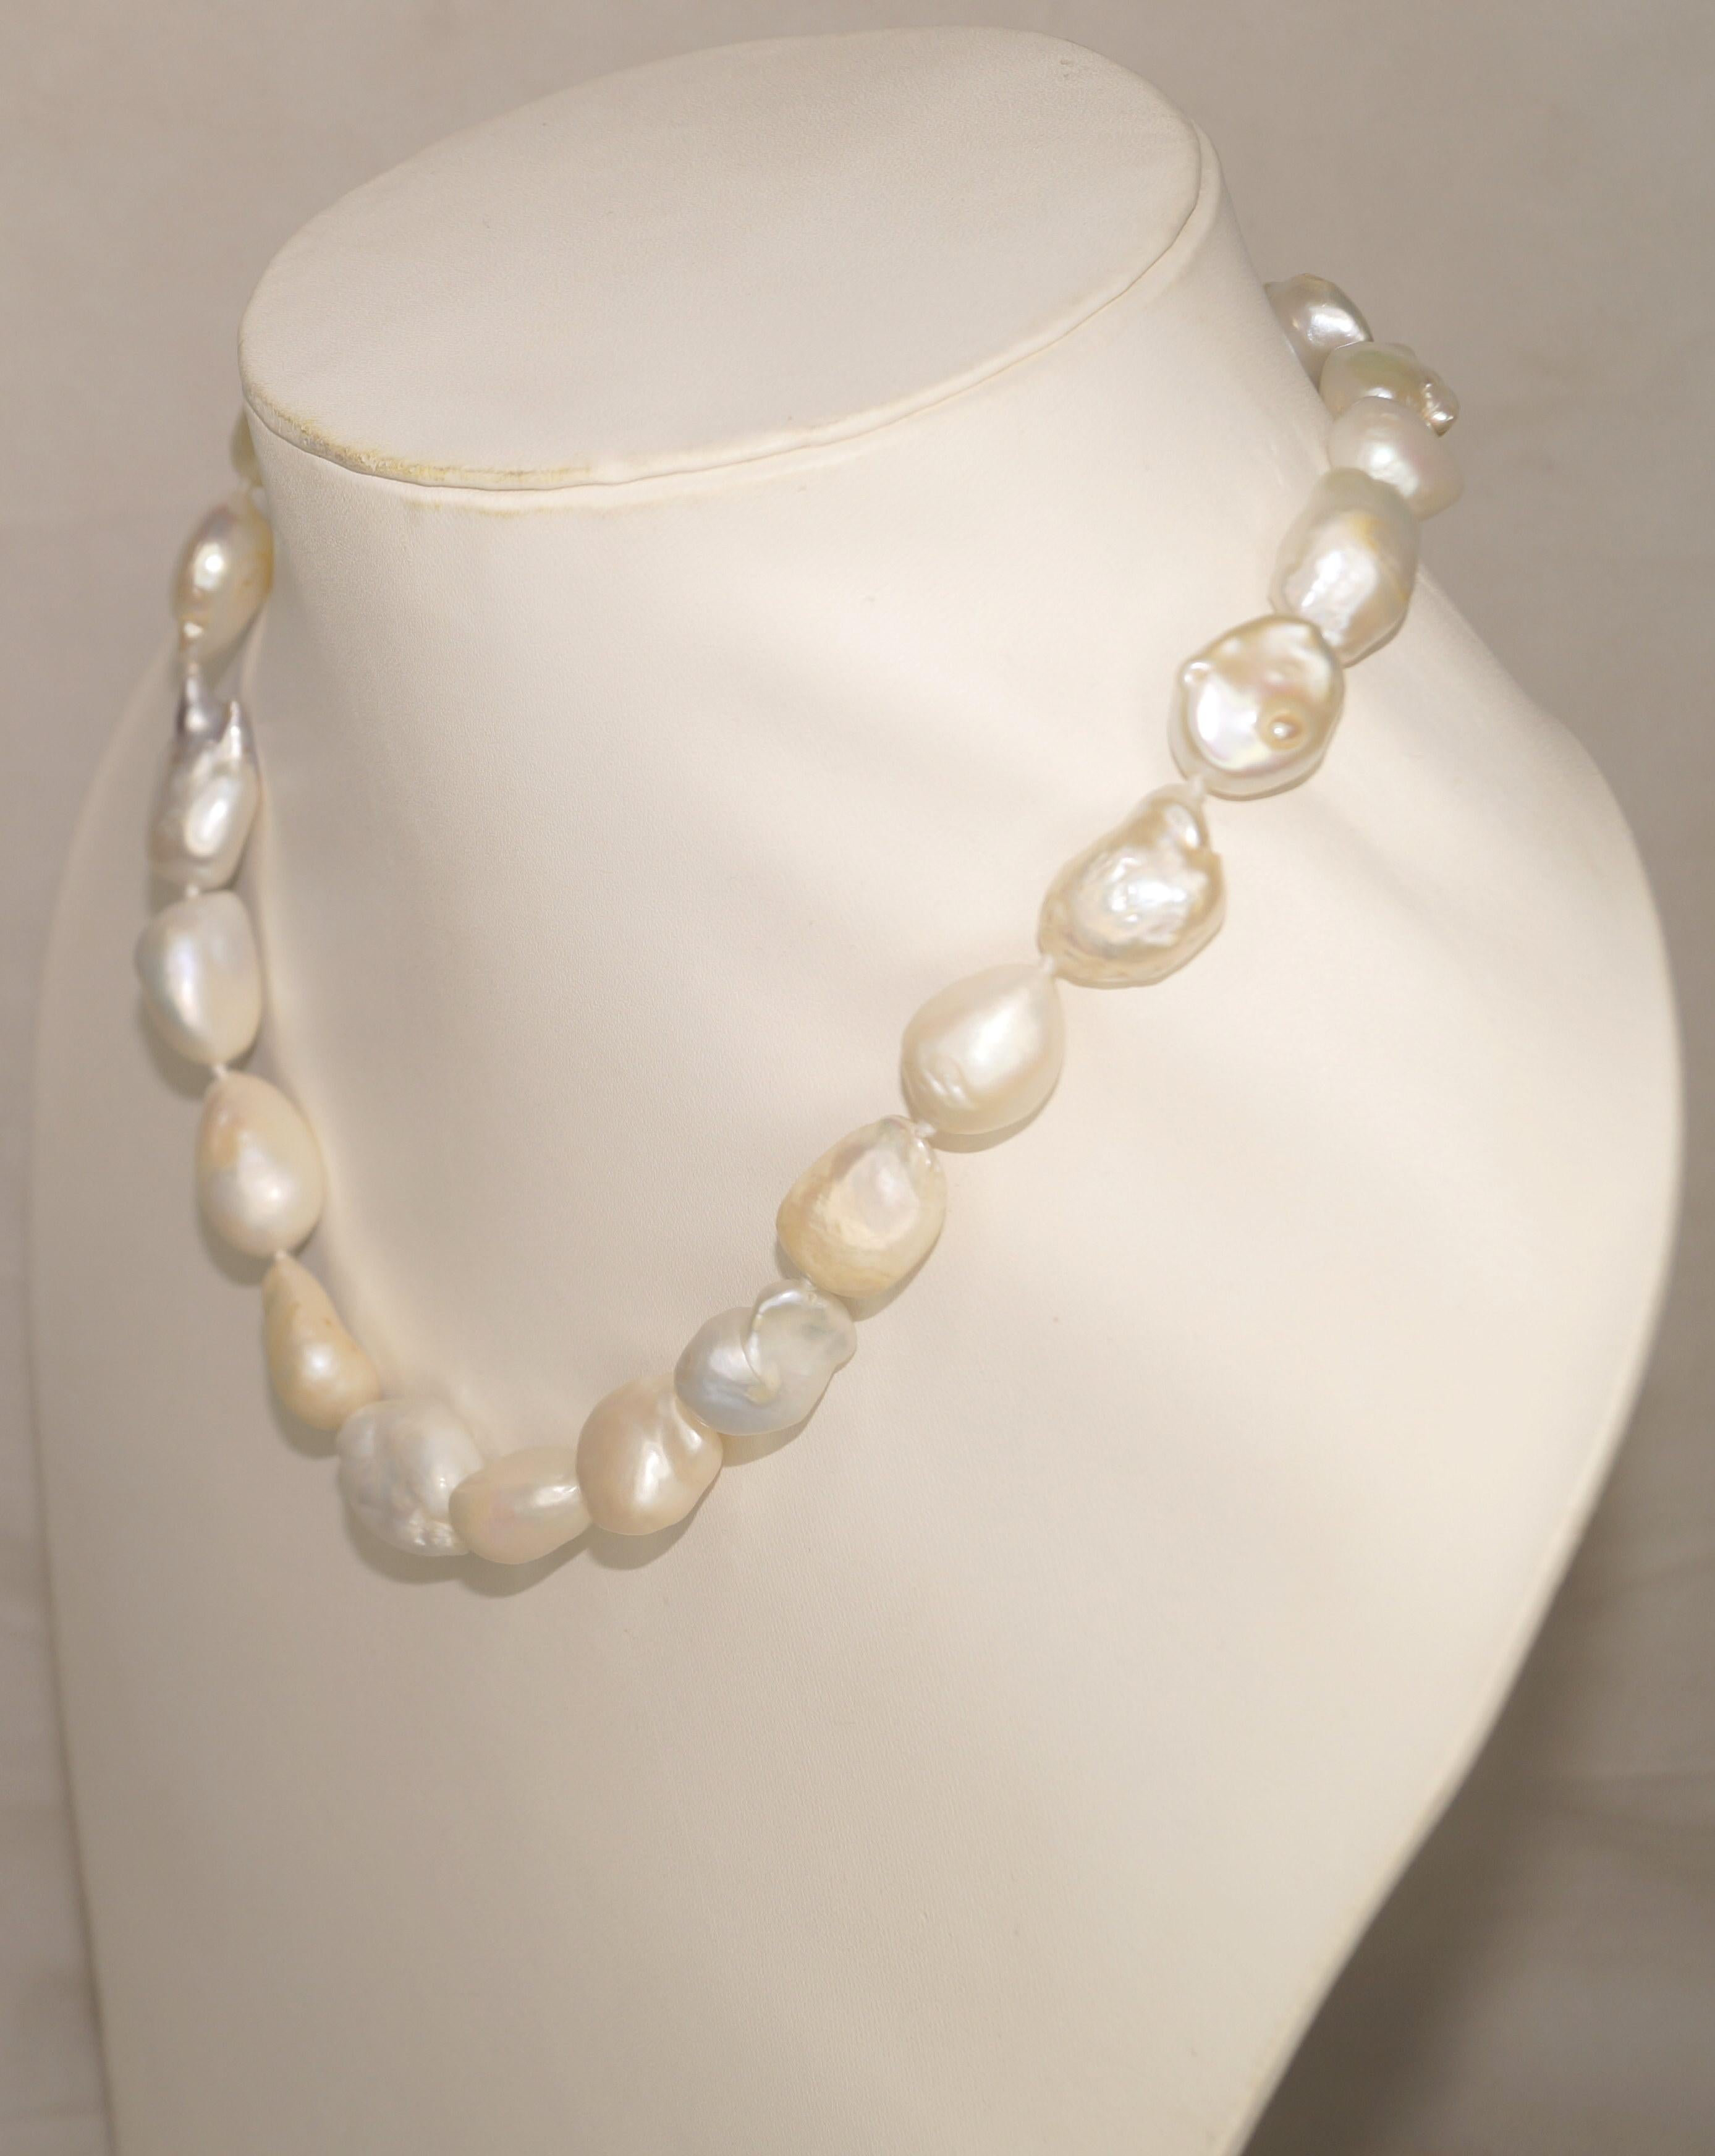 Details:
: 14k Yellow Gold Lock Freshwater baroque pearl beads

: Item no- KM82/300

:Pearl Size: 16mmx23mm (Approx.)

:Necklace length: 20